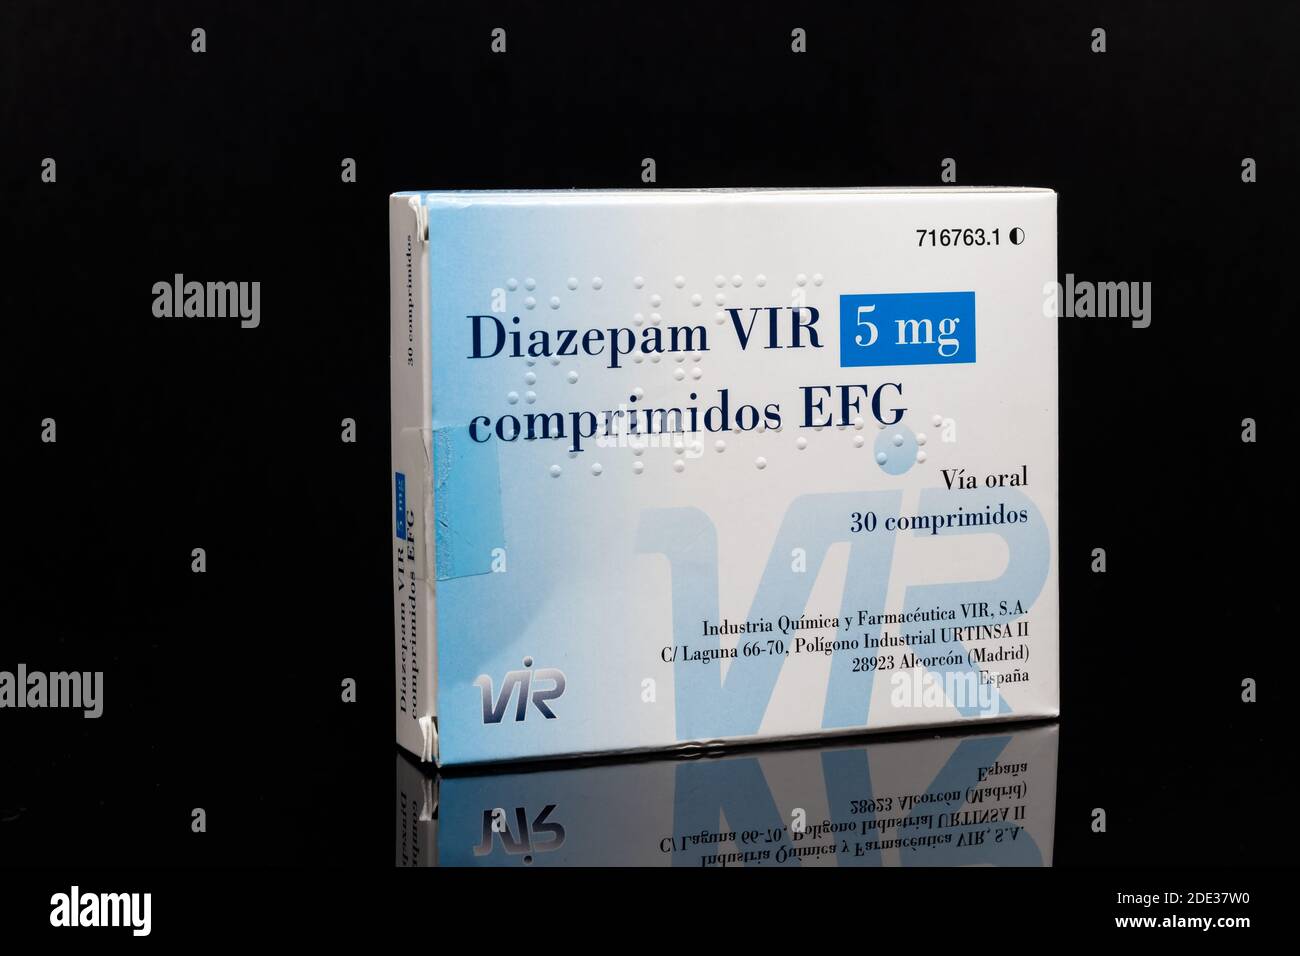 Huelva, Spain - November 26, 2020: Spanish Box of Diazepam brand VIR. Diazepam, first marketed as Valium, is a medicine of the benzodiazepine family t Stock Photo